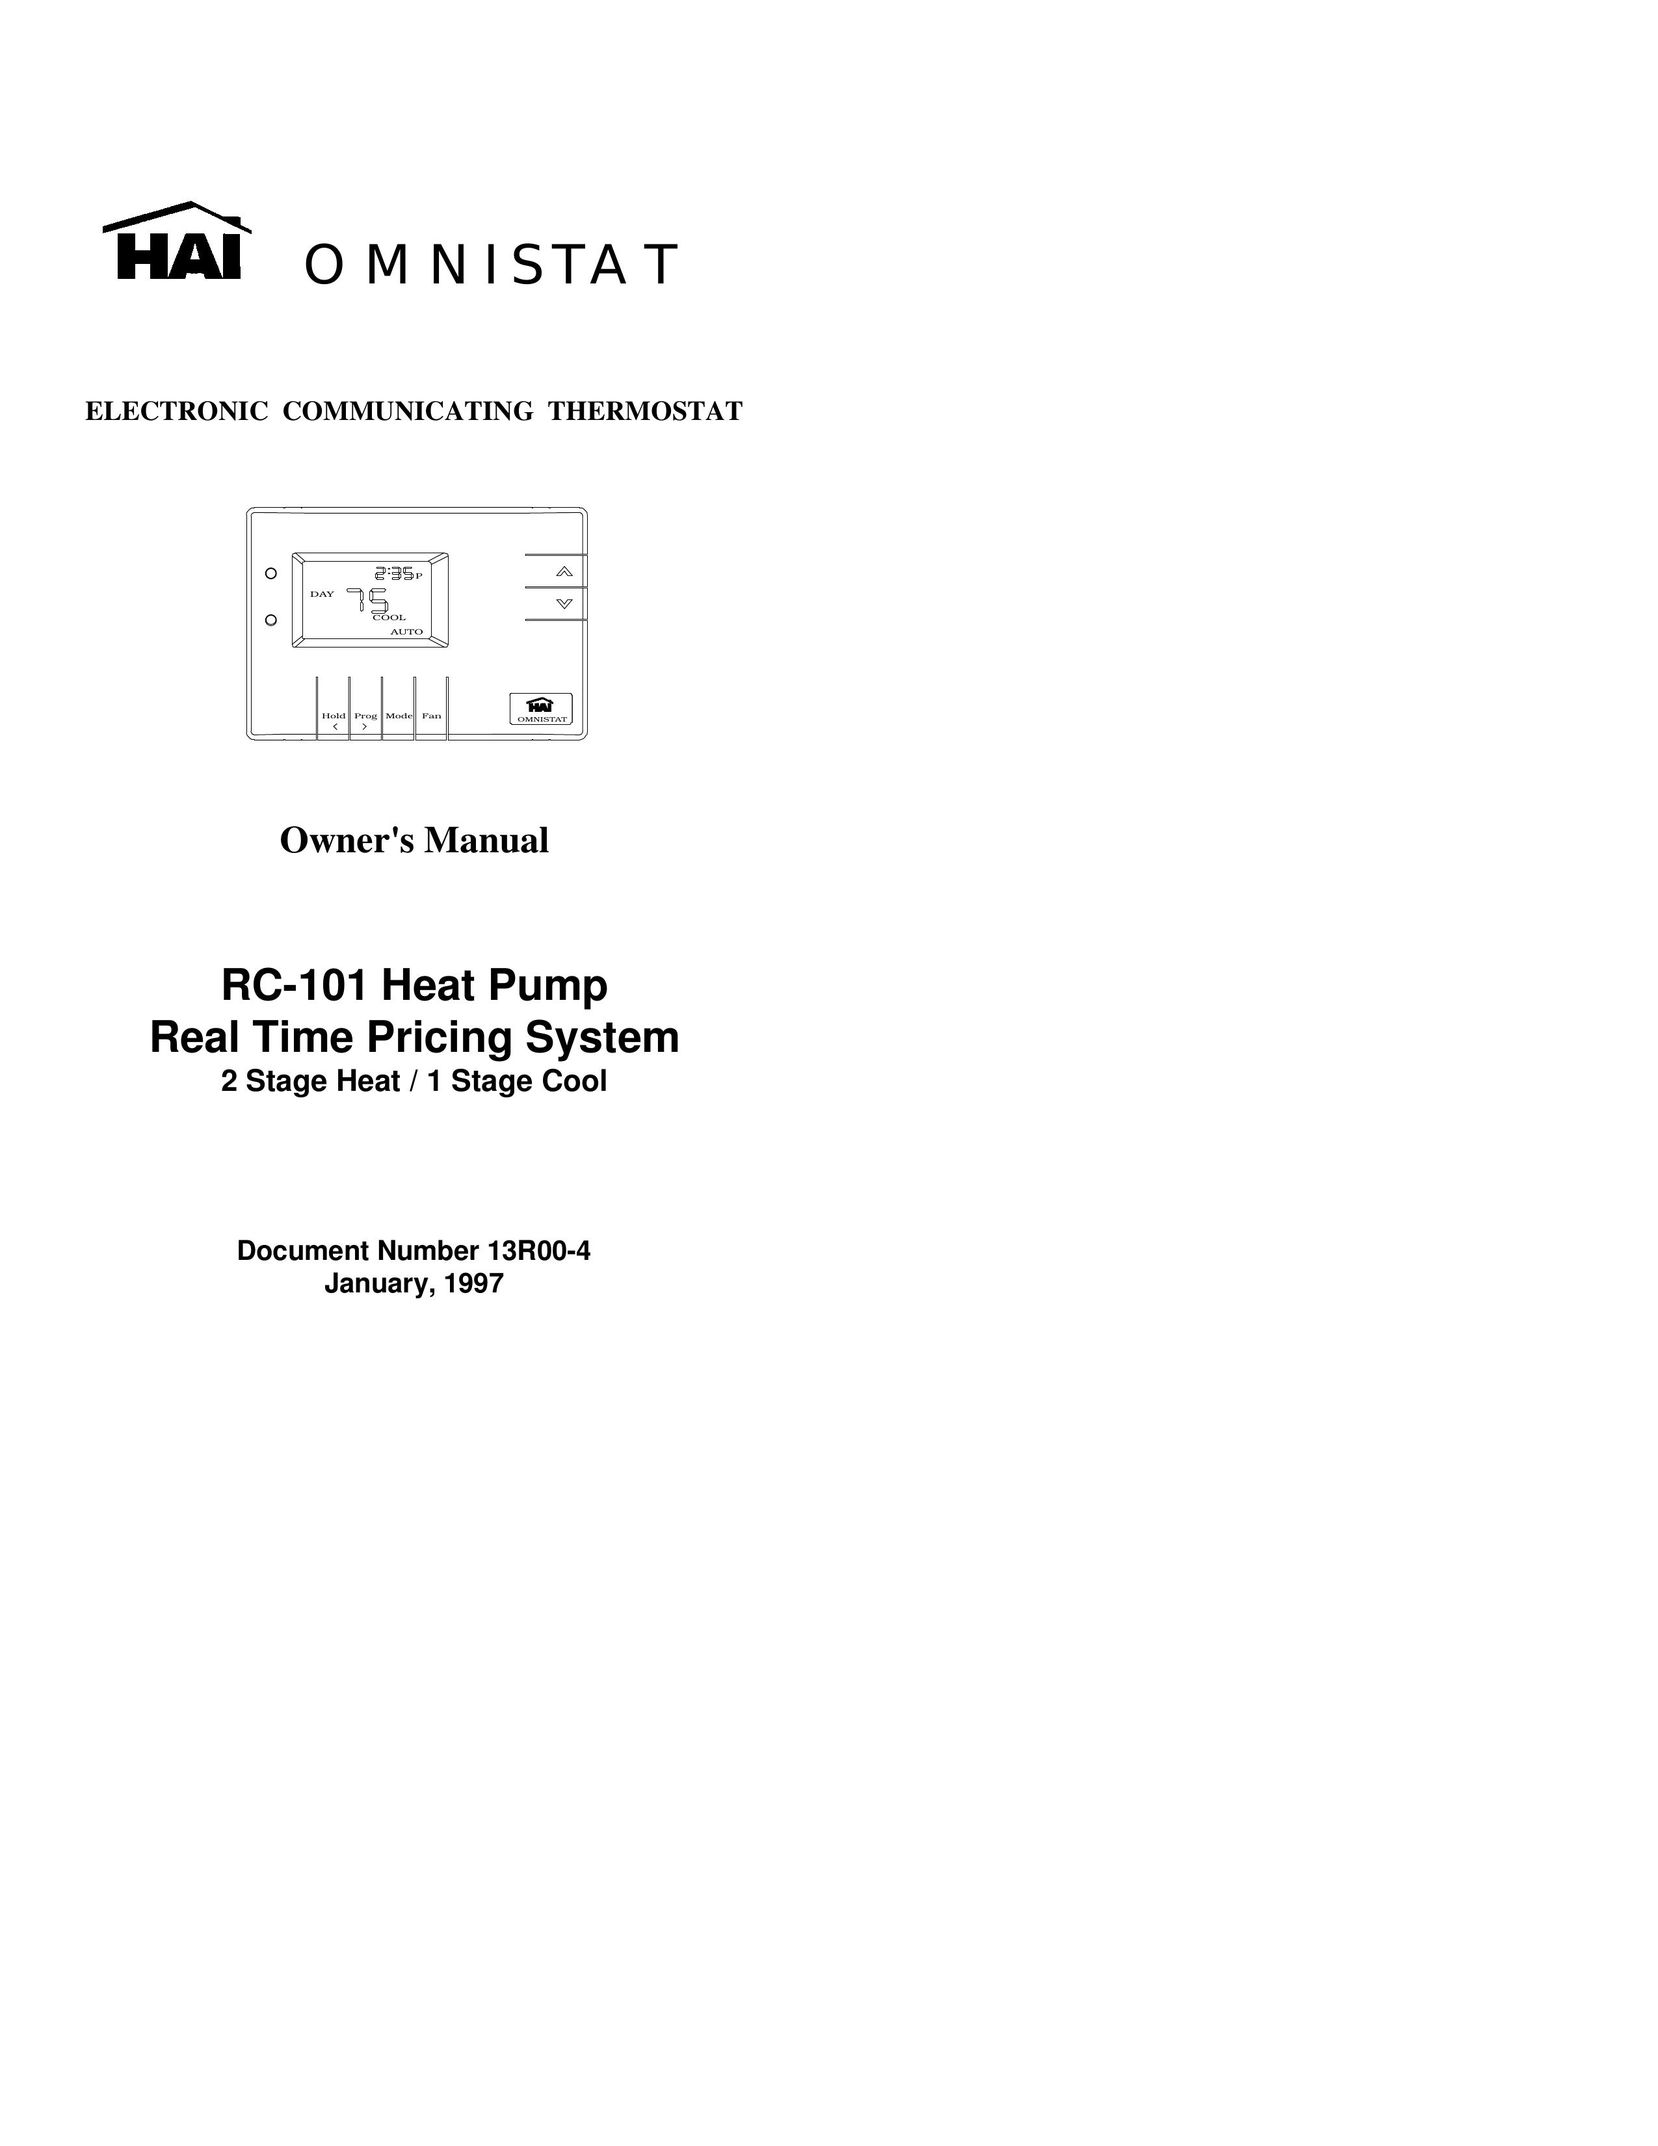 Home Automation 13R00-4 Thermostat User Manual